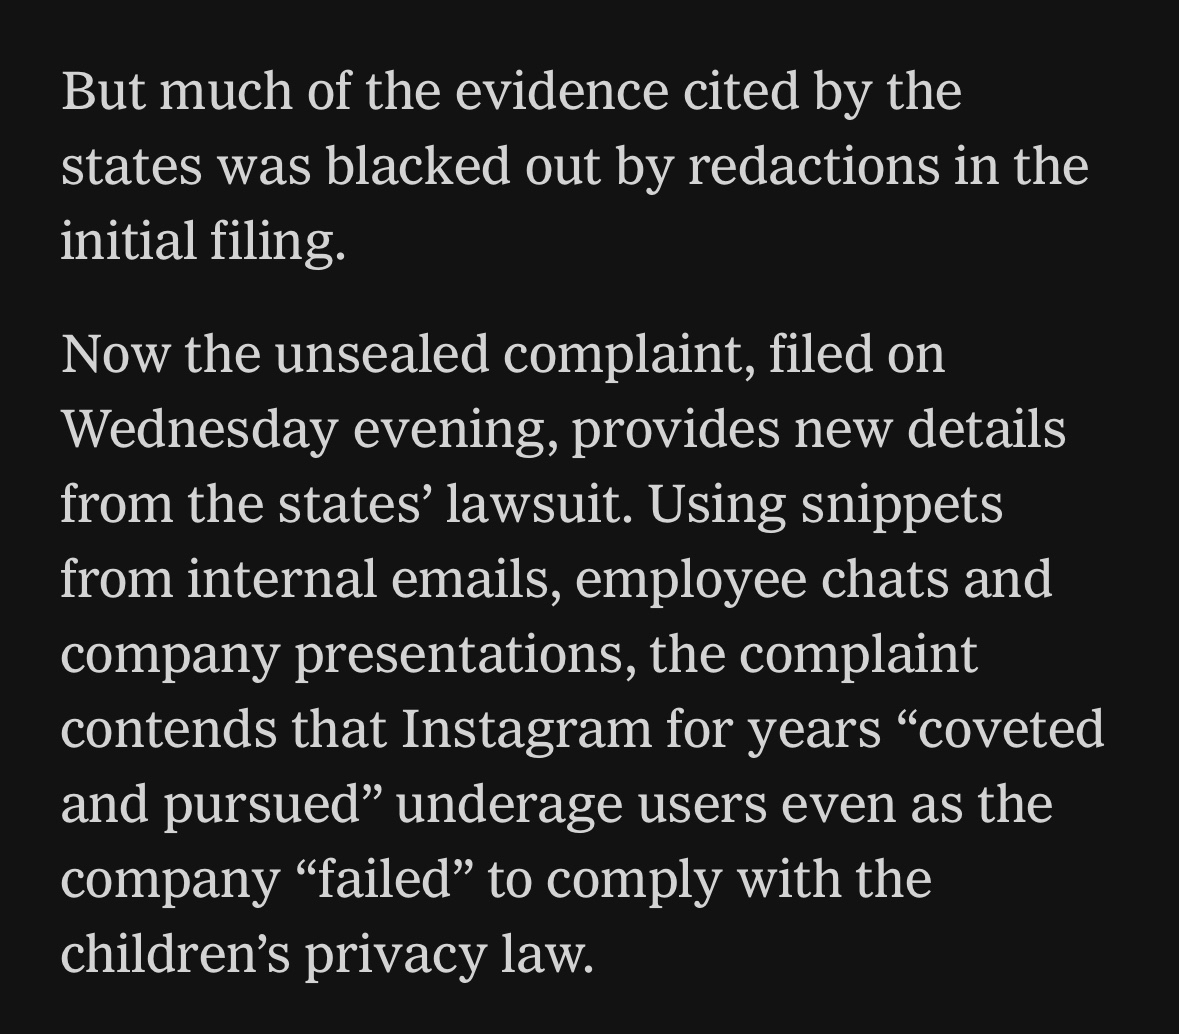 But much of the evidence cited by the states was blacked out by redactions in the initial filing.&10;Now the unsealed complaint, filled on Wednesday evening, provides new details from the states' lawsuit. Using snippets from internal emails, employee chats and company presentations, the complaint contends that Instagram for years "coveted and pursued" underage users even as the company "failed" to comply with the children's privacy law.